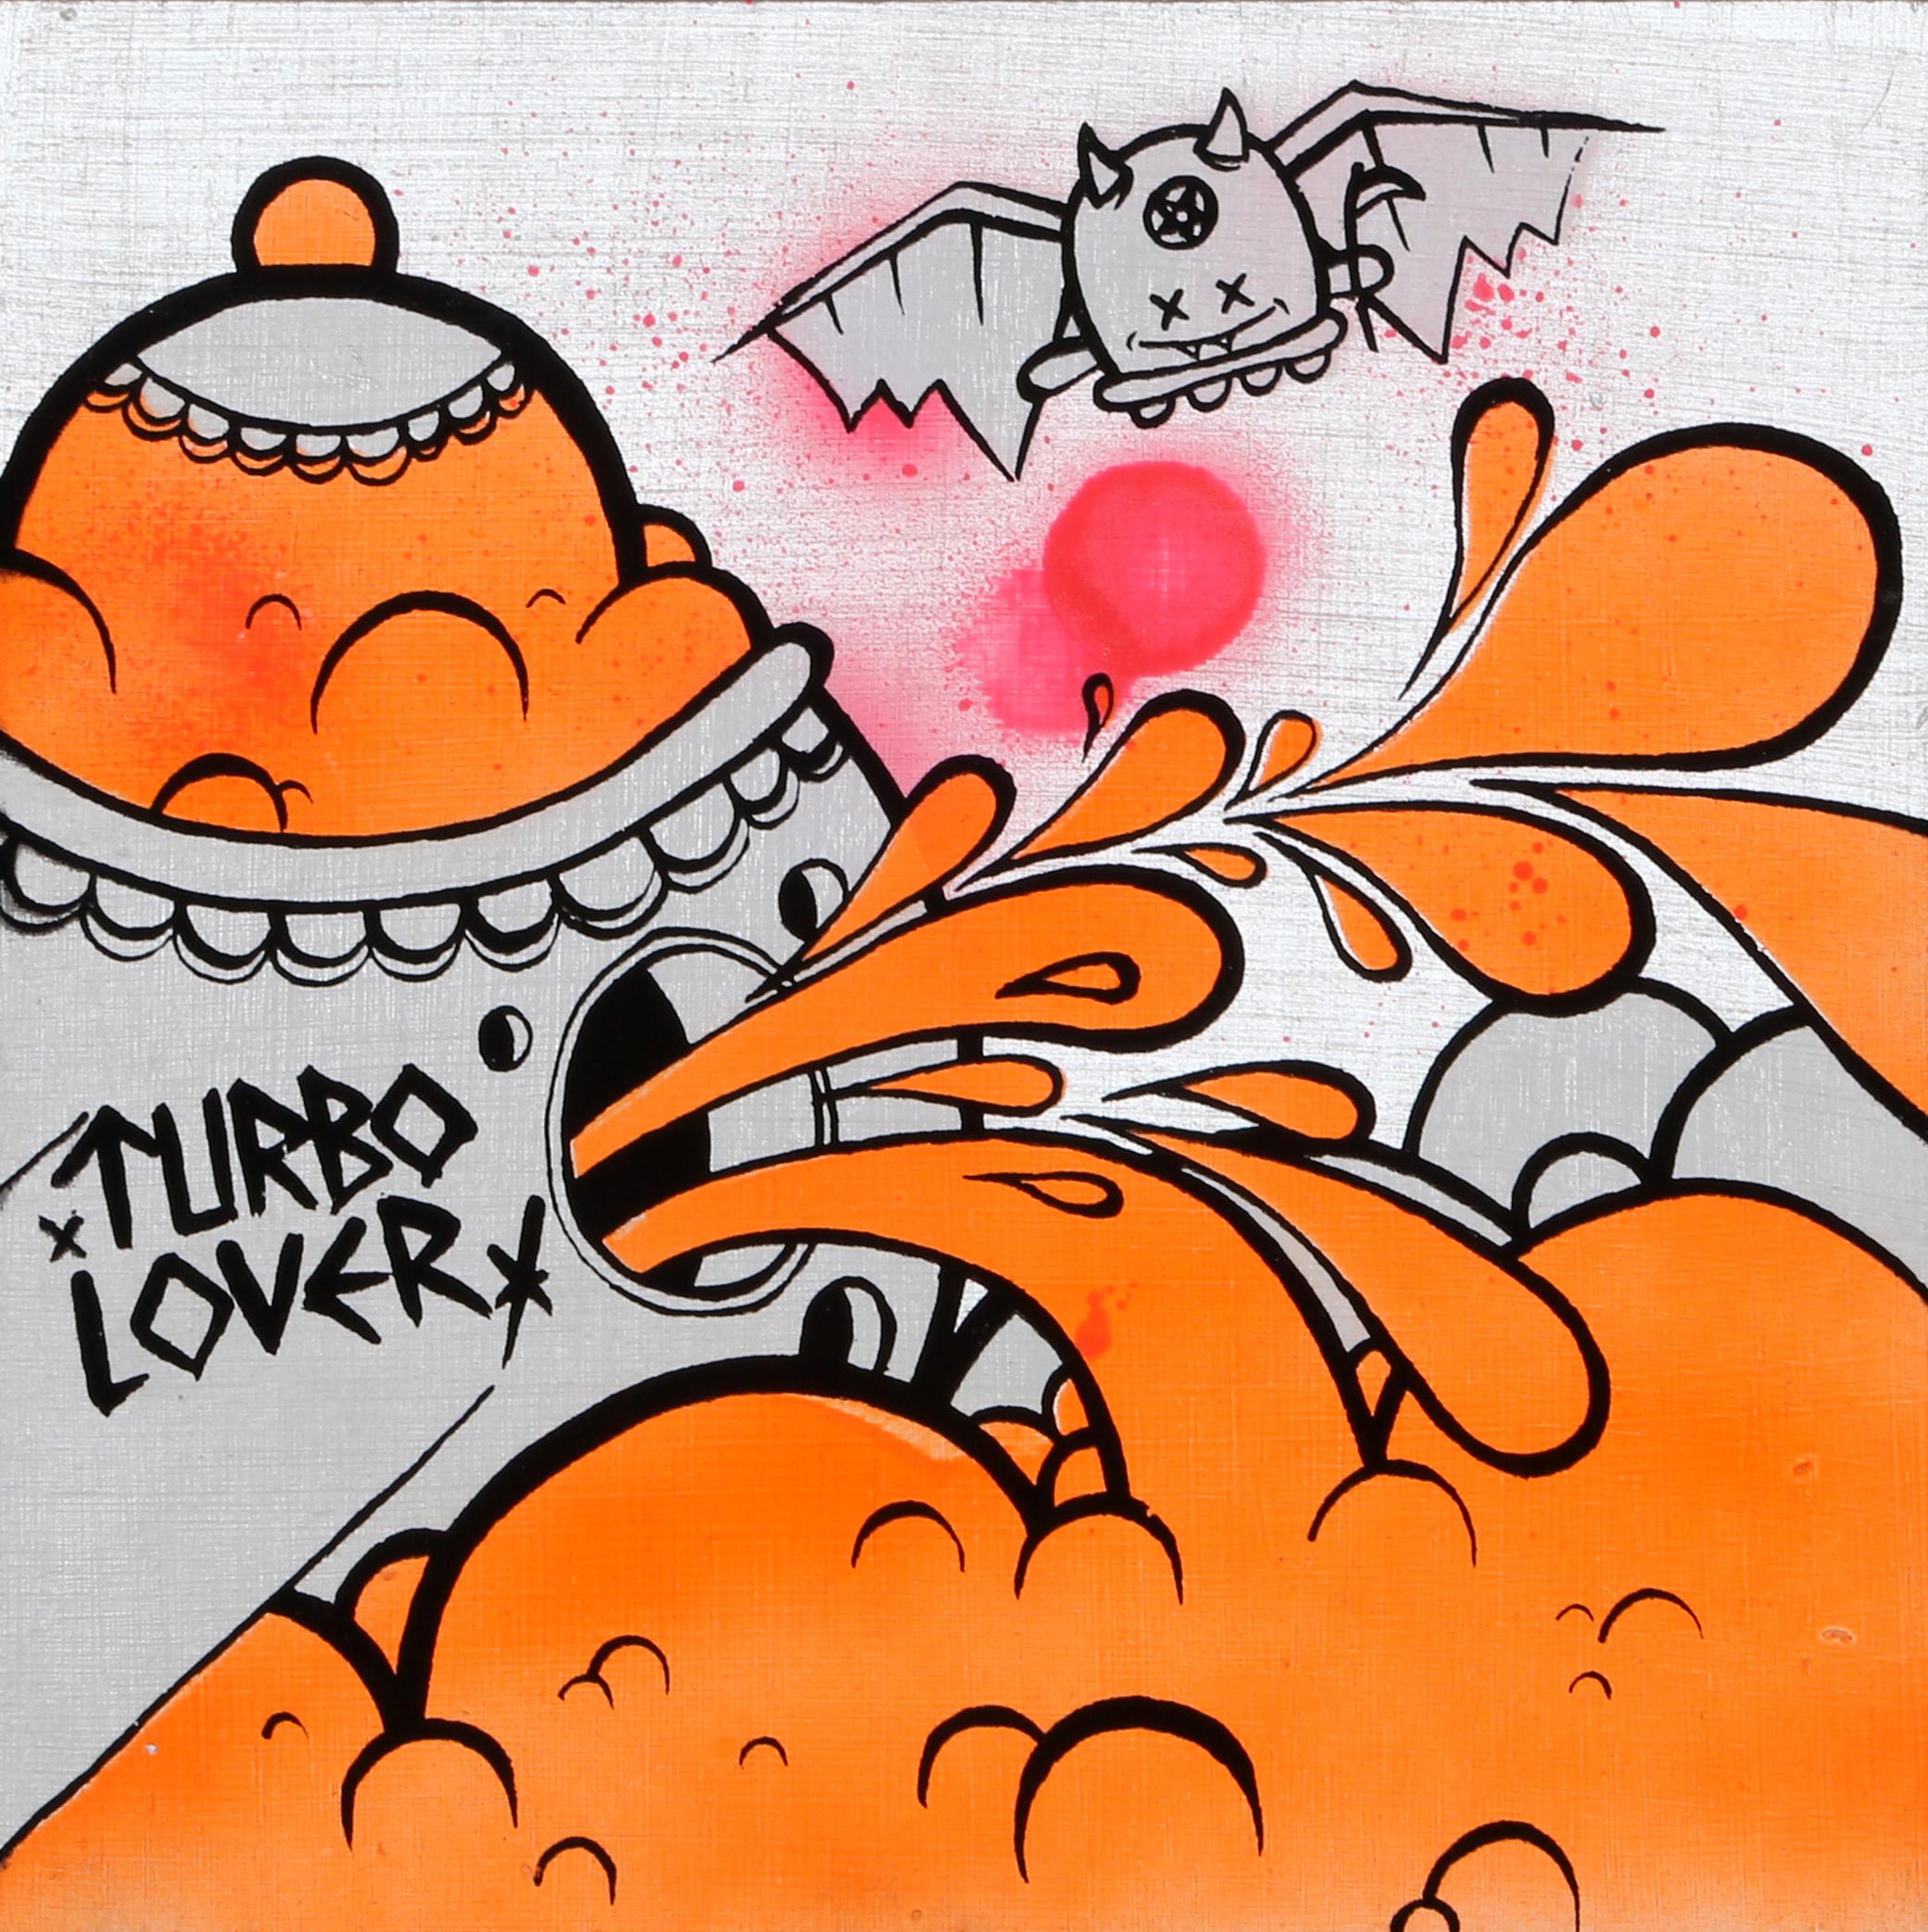 Turbo Lover, Acrylic and Spray Paint on Canvas by Buff Monster For Sale 1